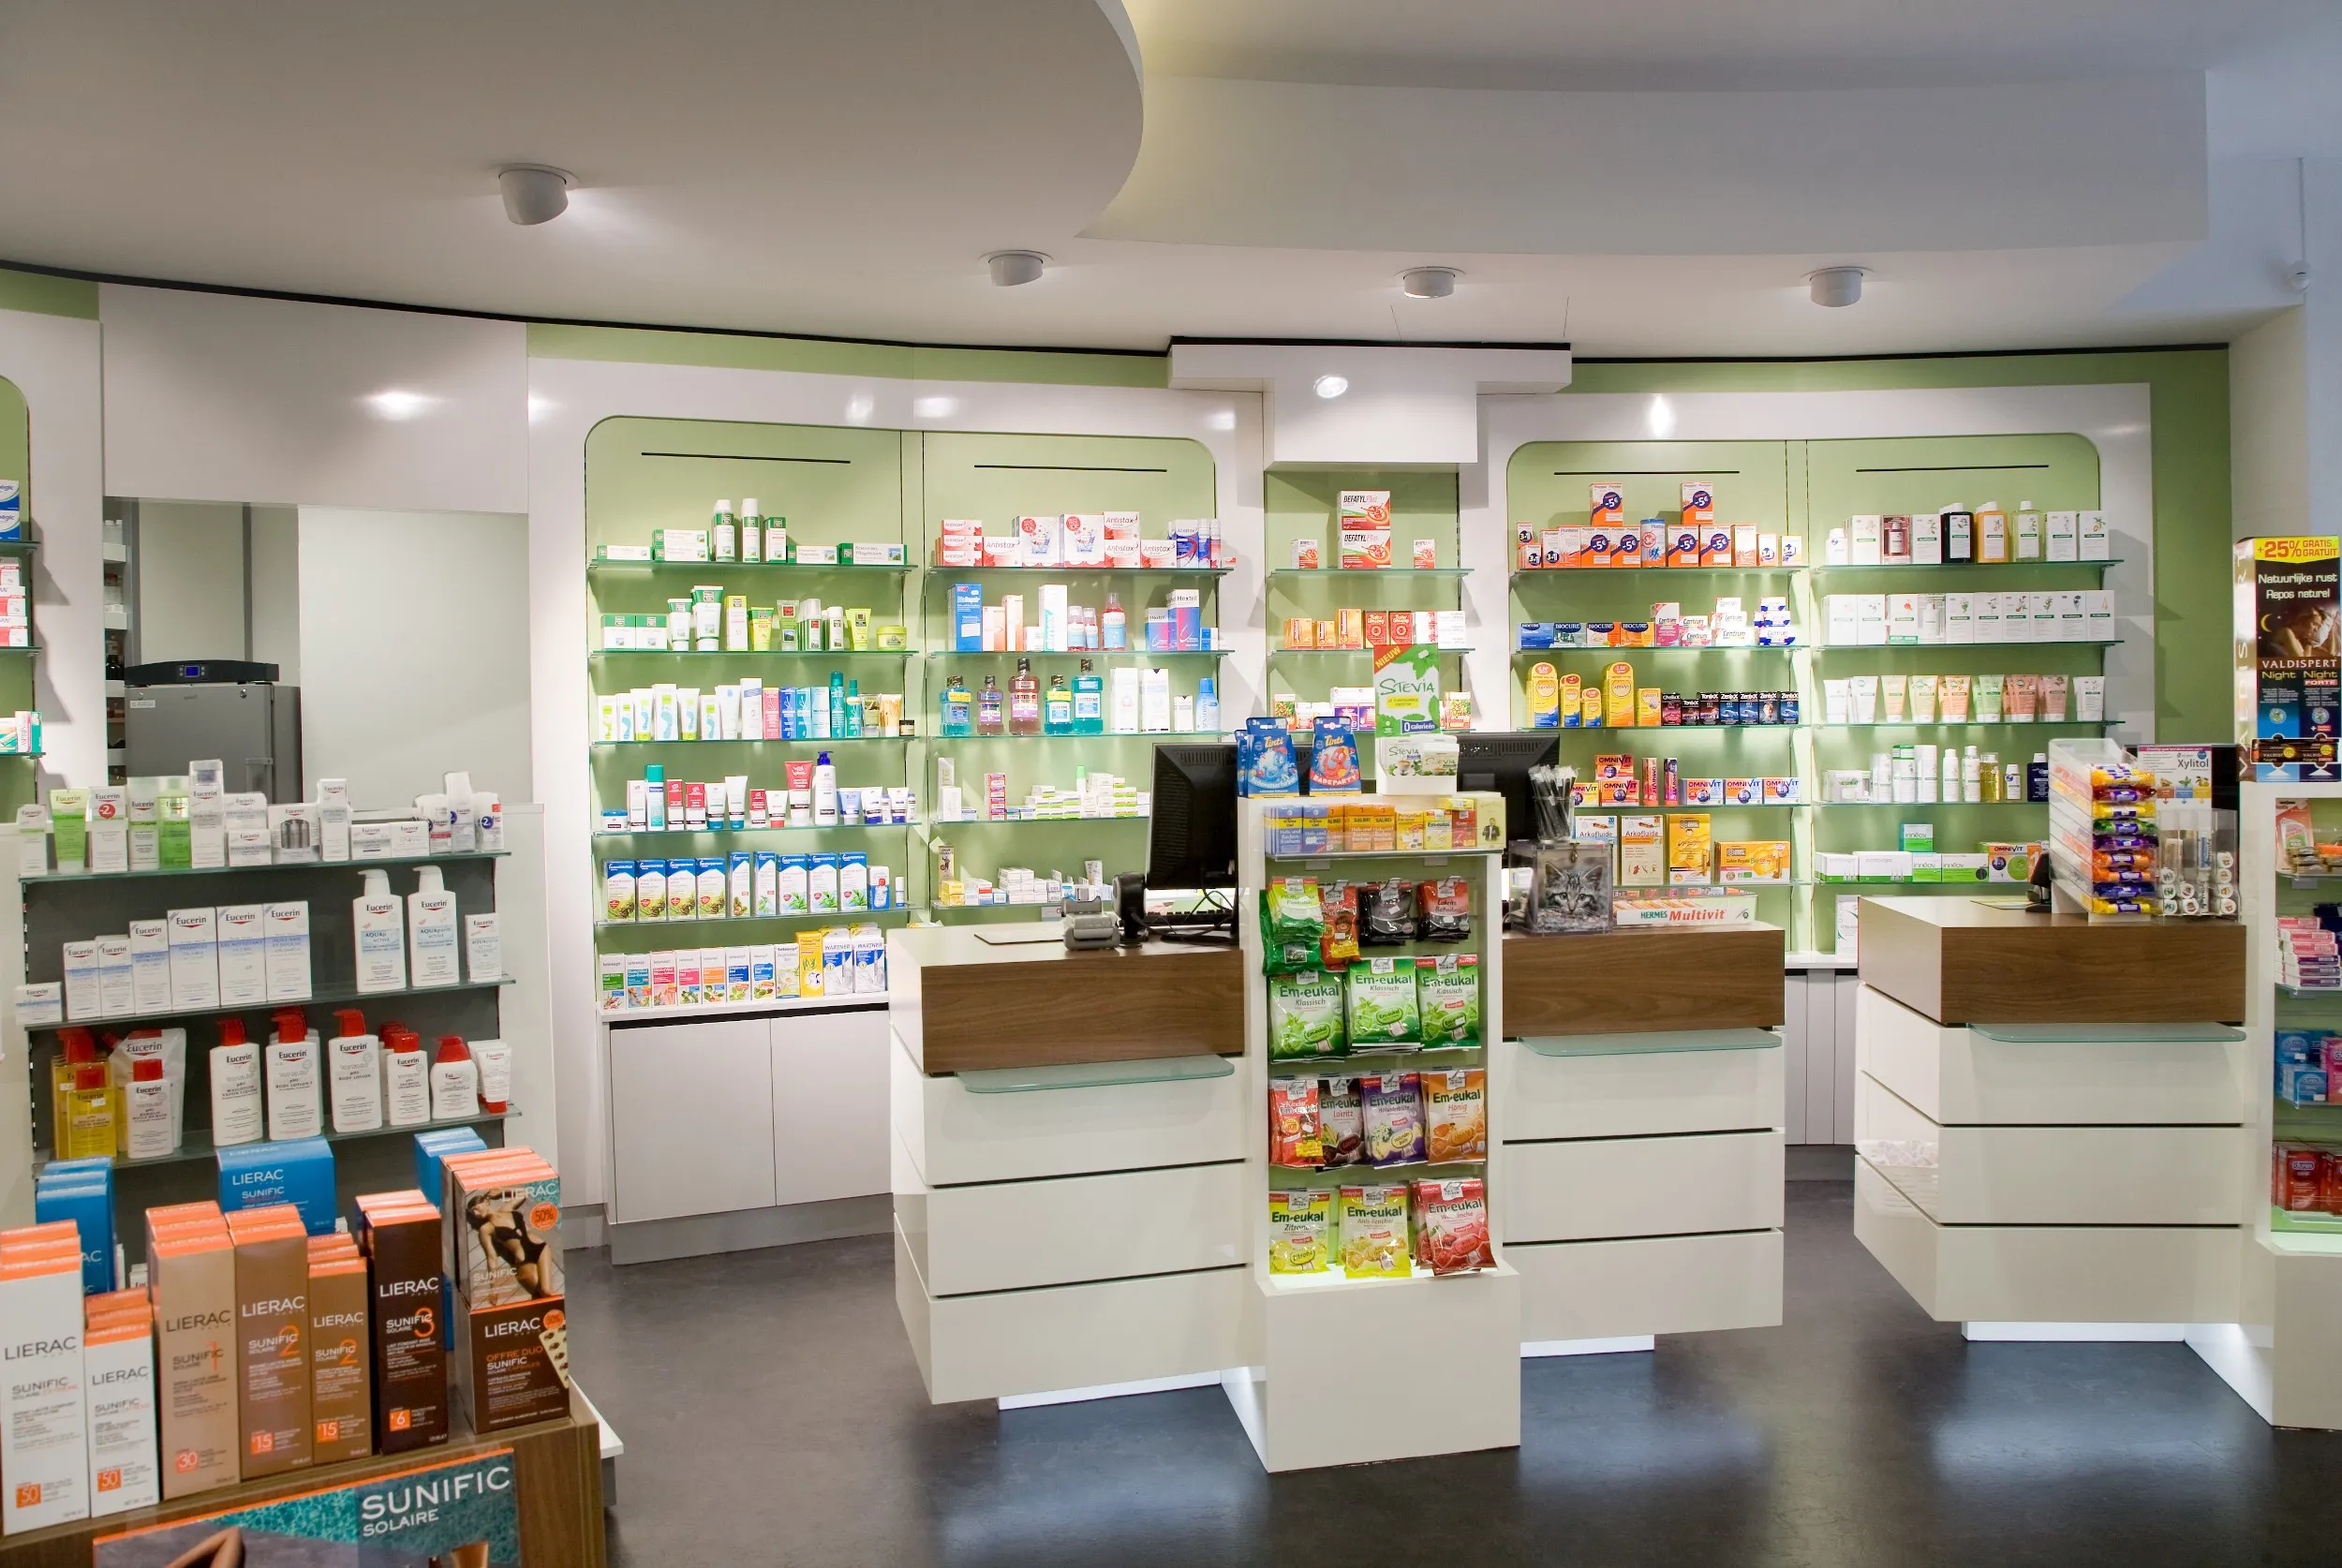 Pharmacie Stumper in Luxembourg, Europe | Cannabis Cafes & Stores - Rated 3.9